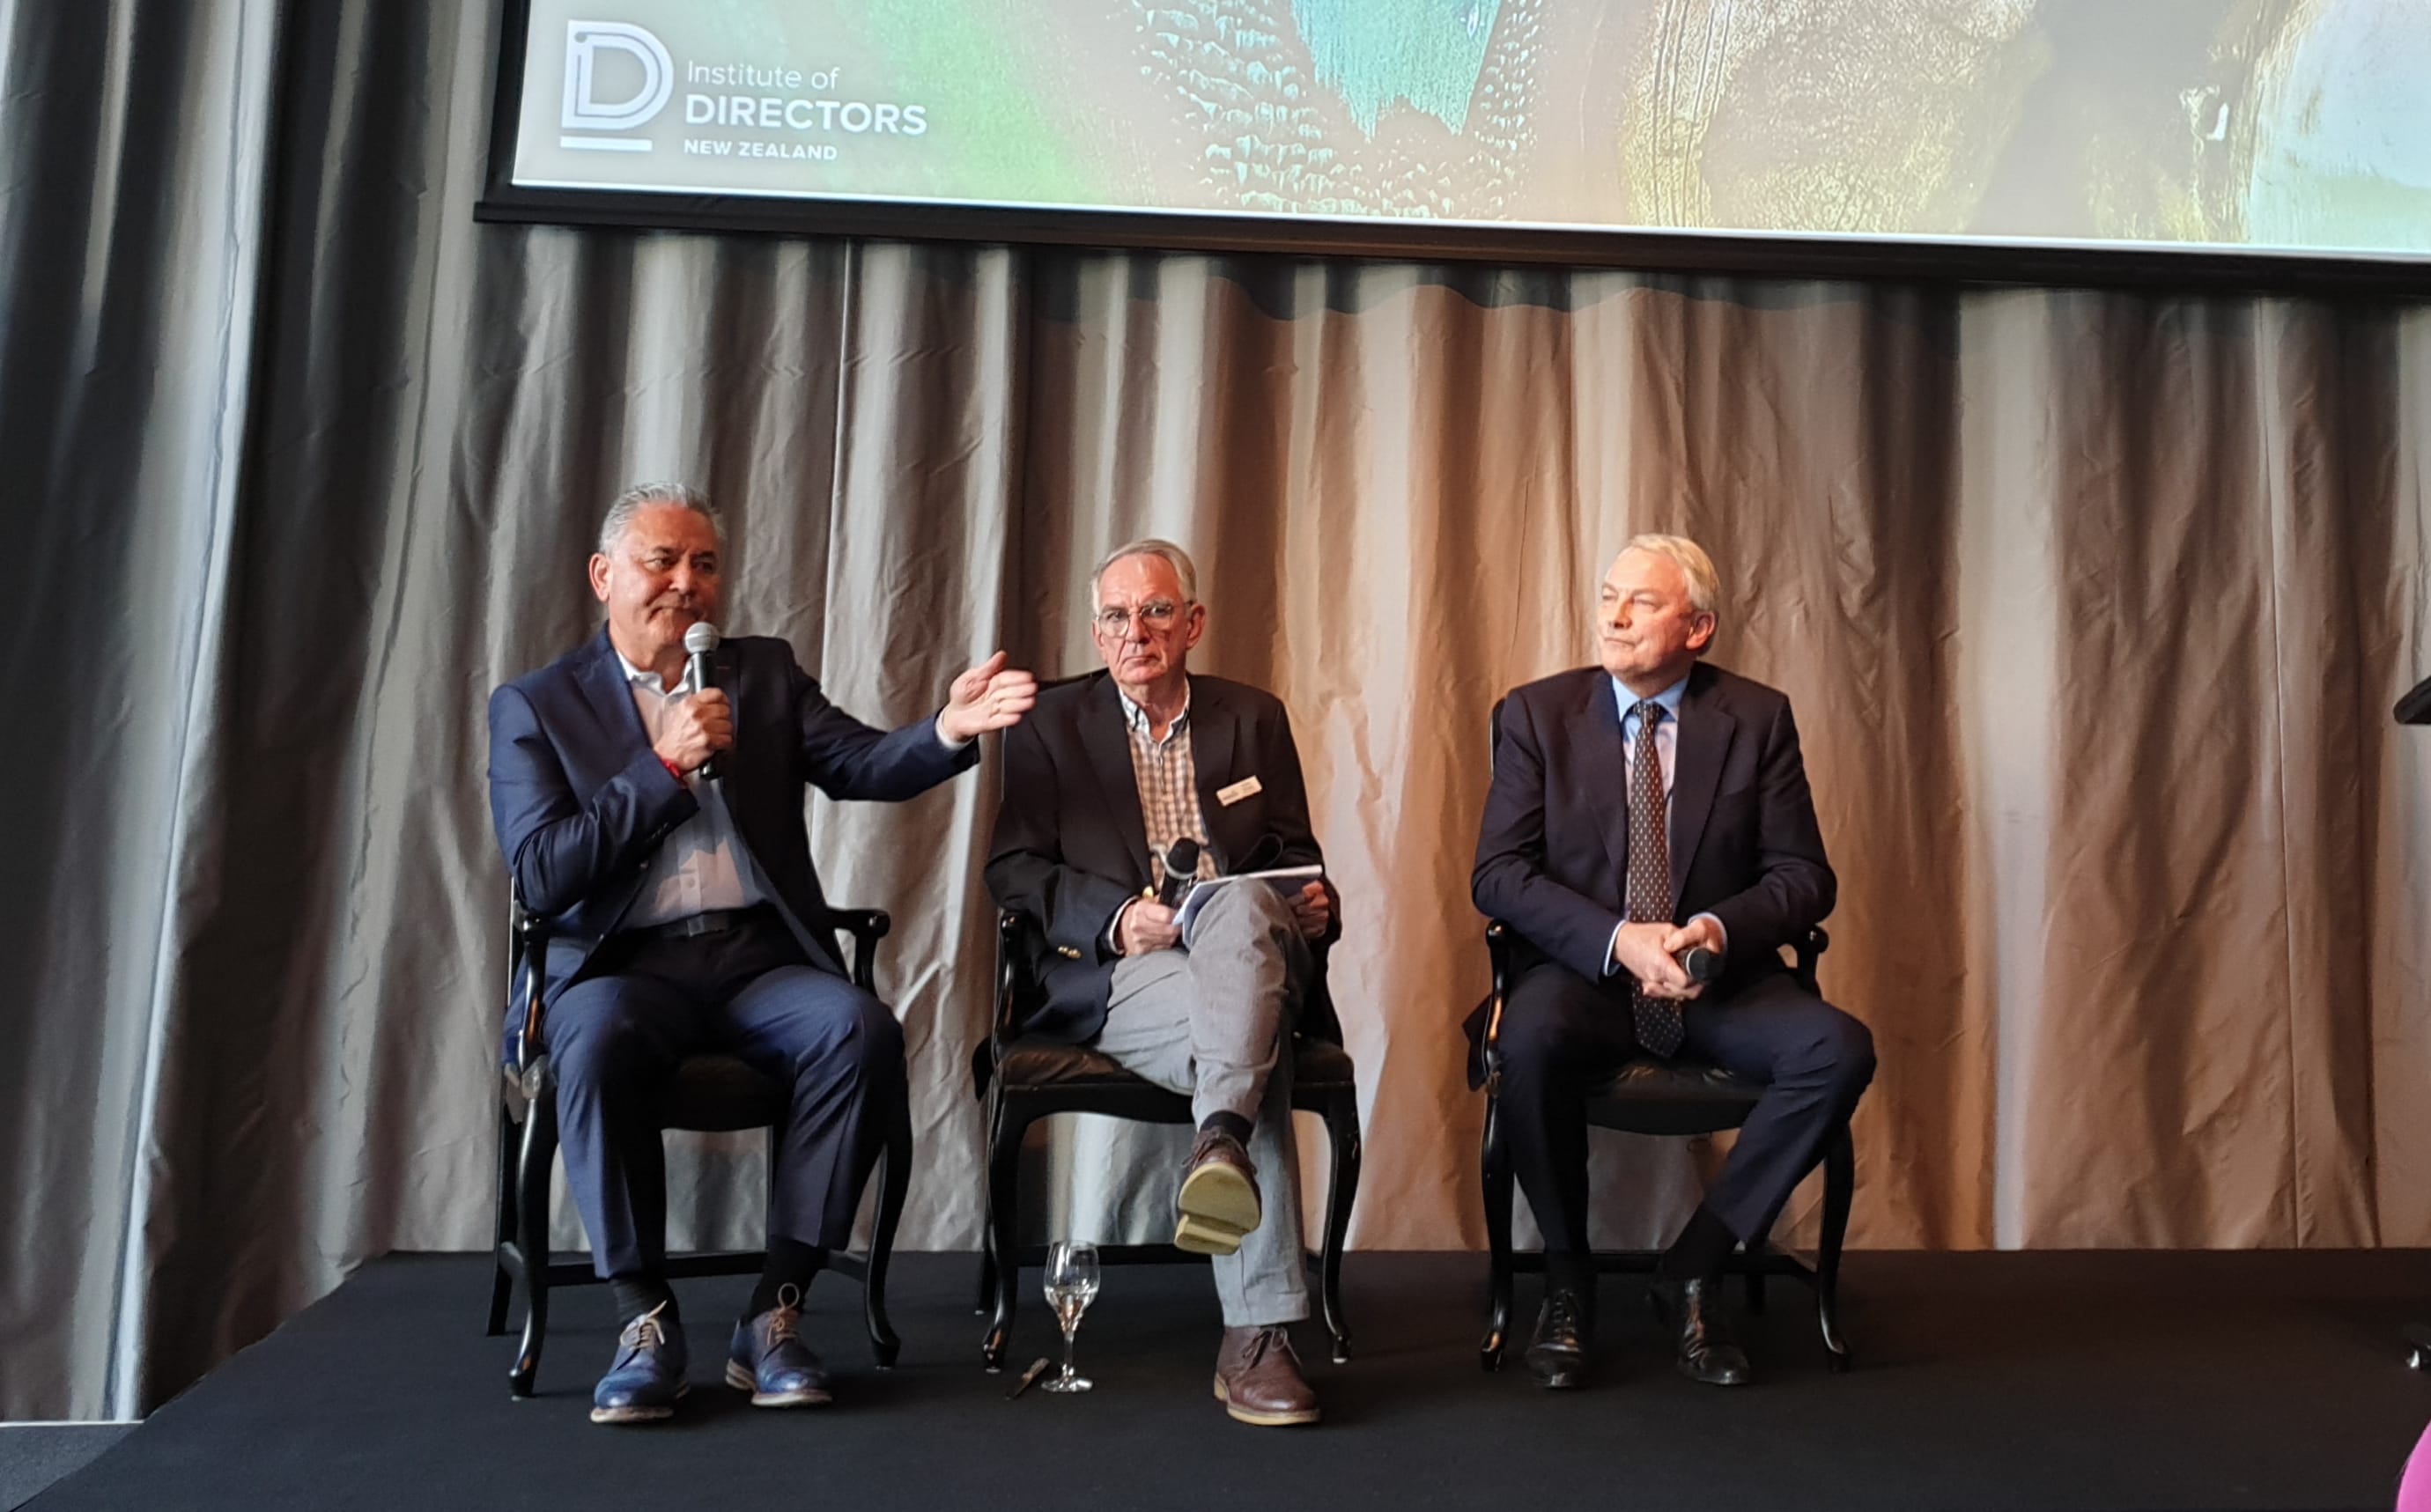 John Tamihere and Phil Goff debate at an Institute of Directors breakfast session.